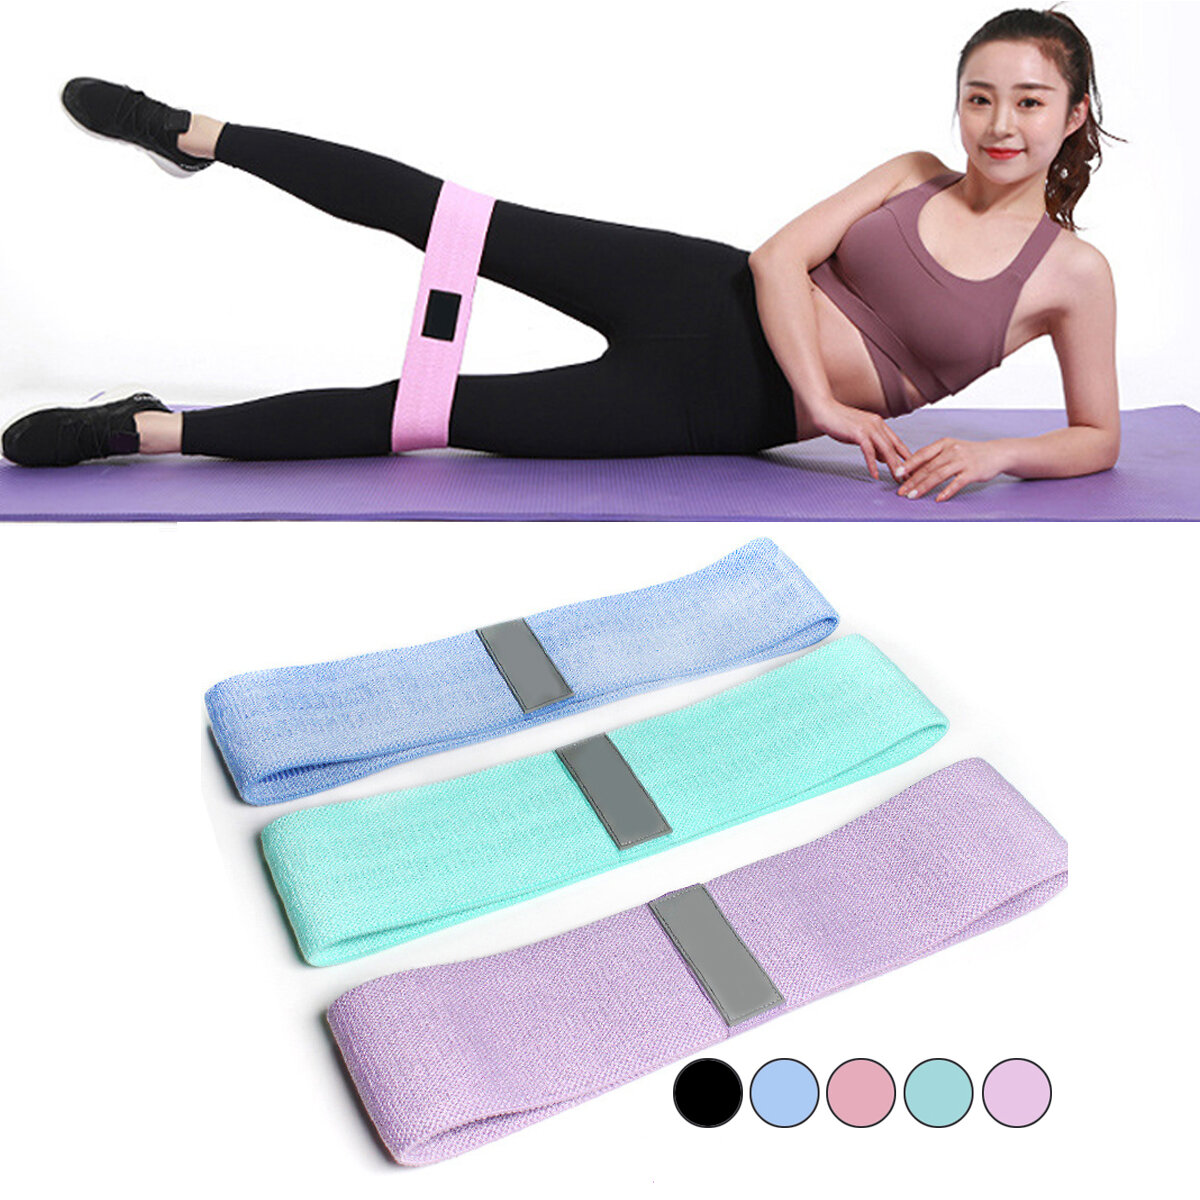 120Lbs M-XL Non-slip Home Resistance Bands Body Shaping Slimming Yoga Loop Legs Fitness Exercise Too